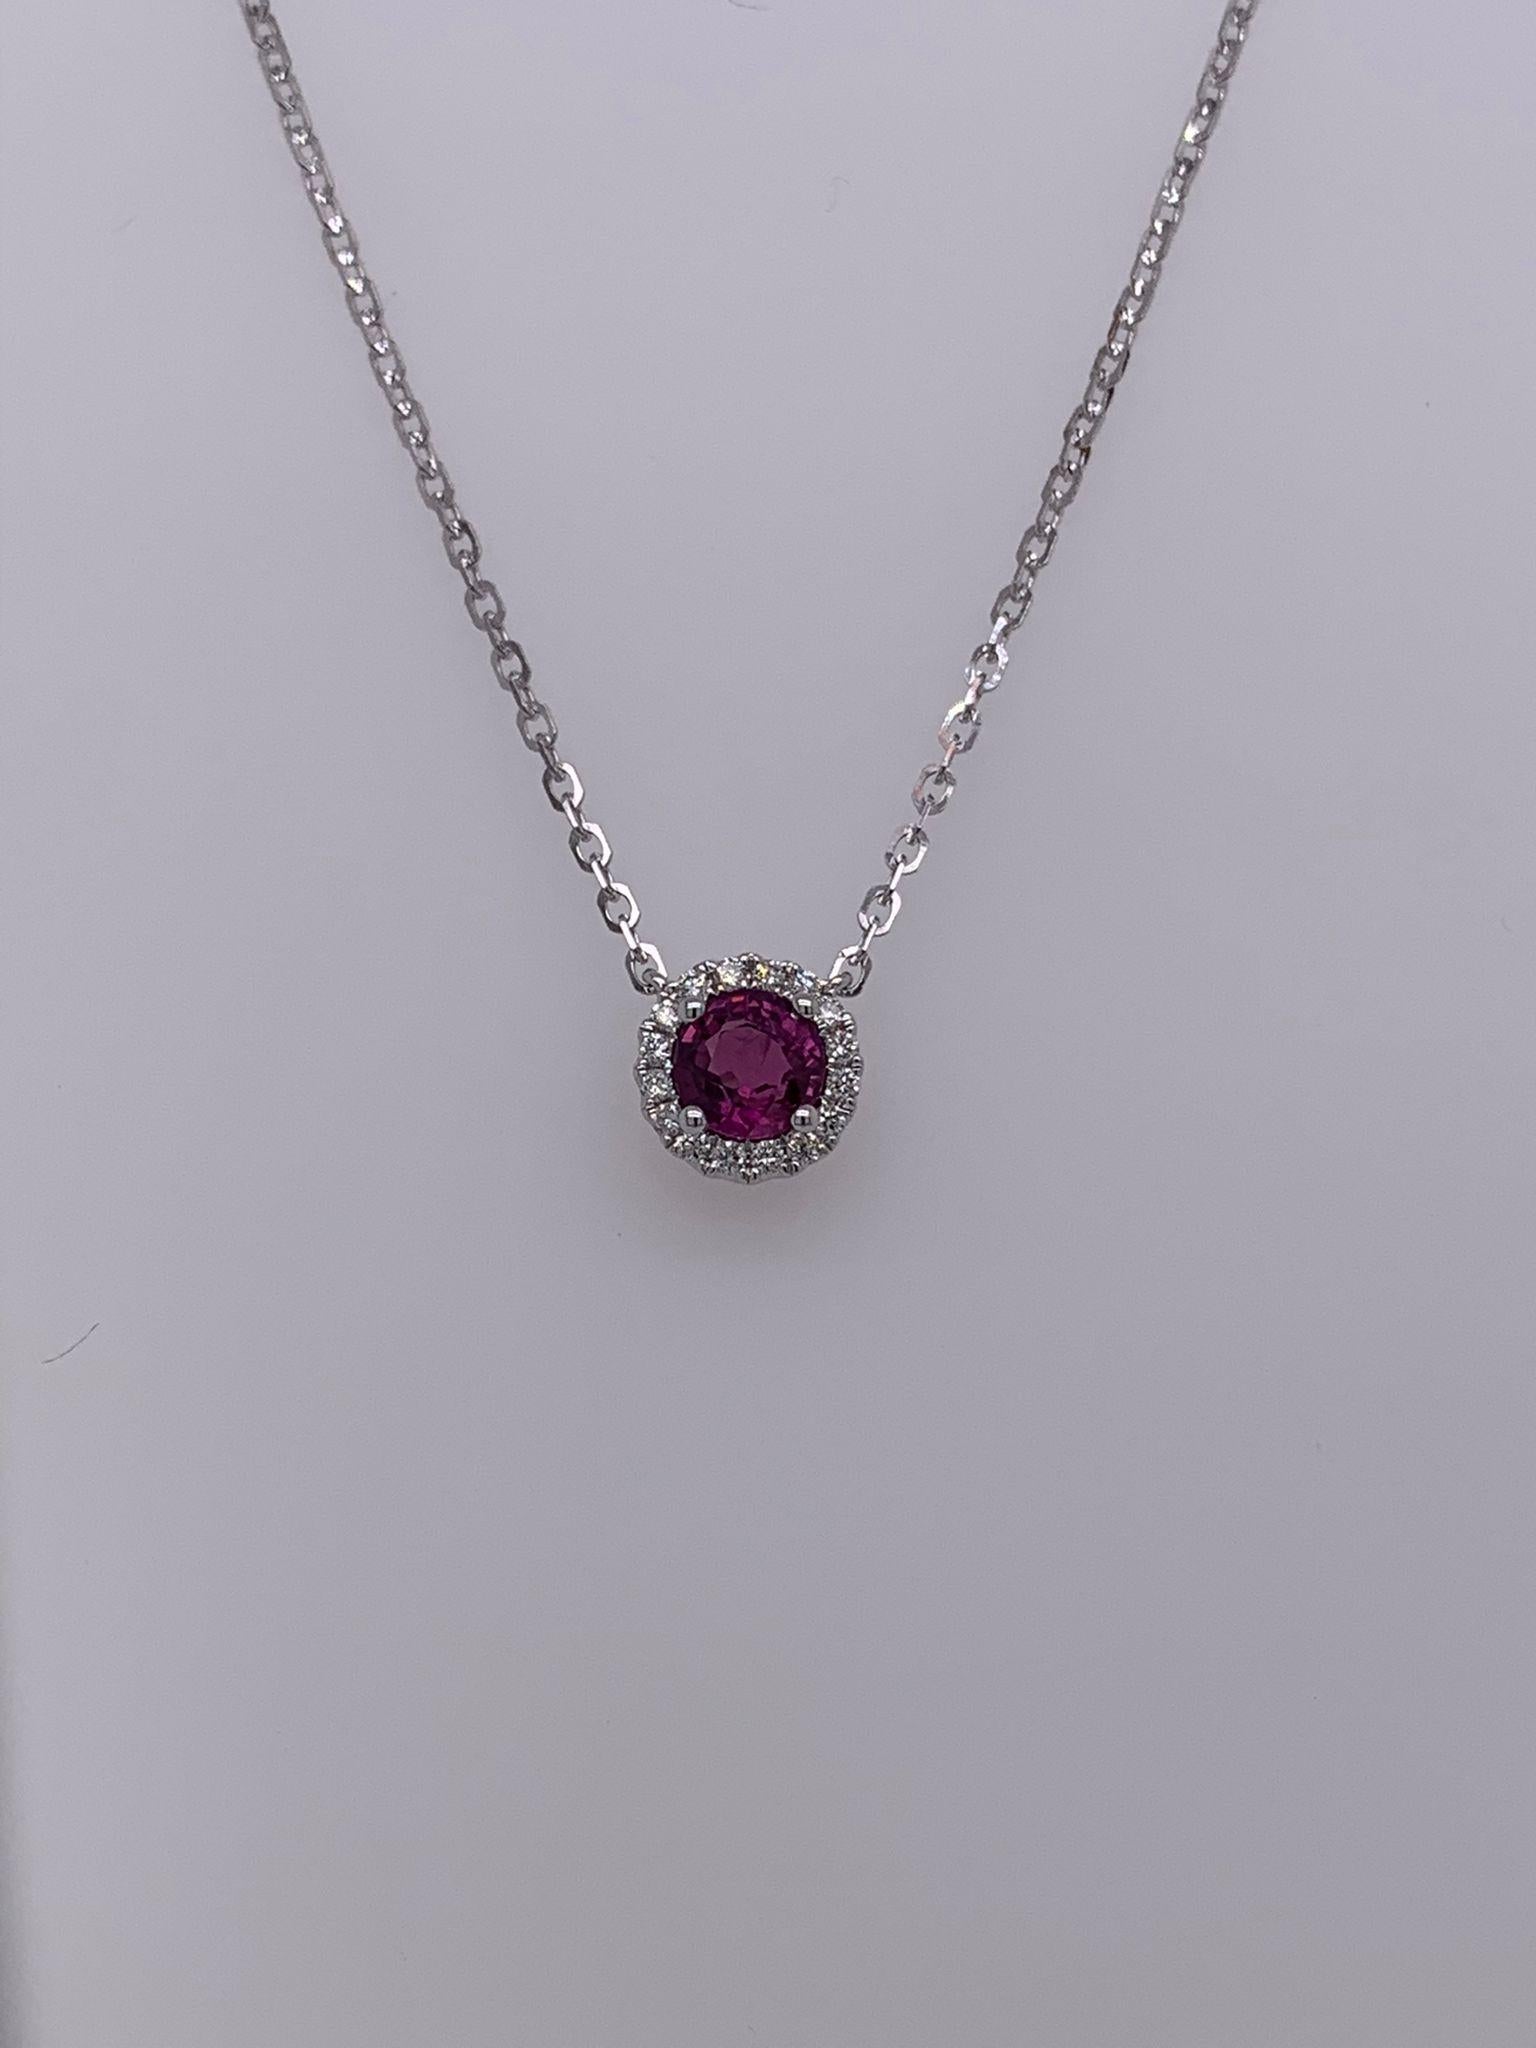 Round Ruby weighing 0.67 cts
Measuring 5.0 mm
Diamonds weighing 0.10 cts
Set in 14K white gold
